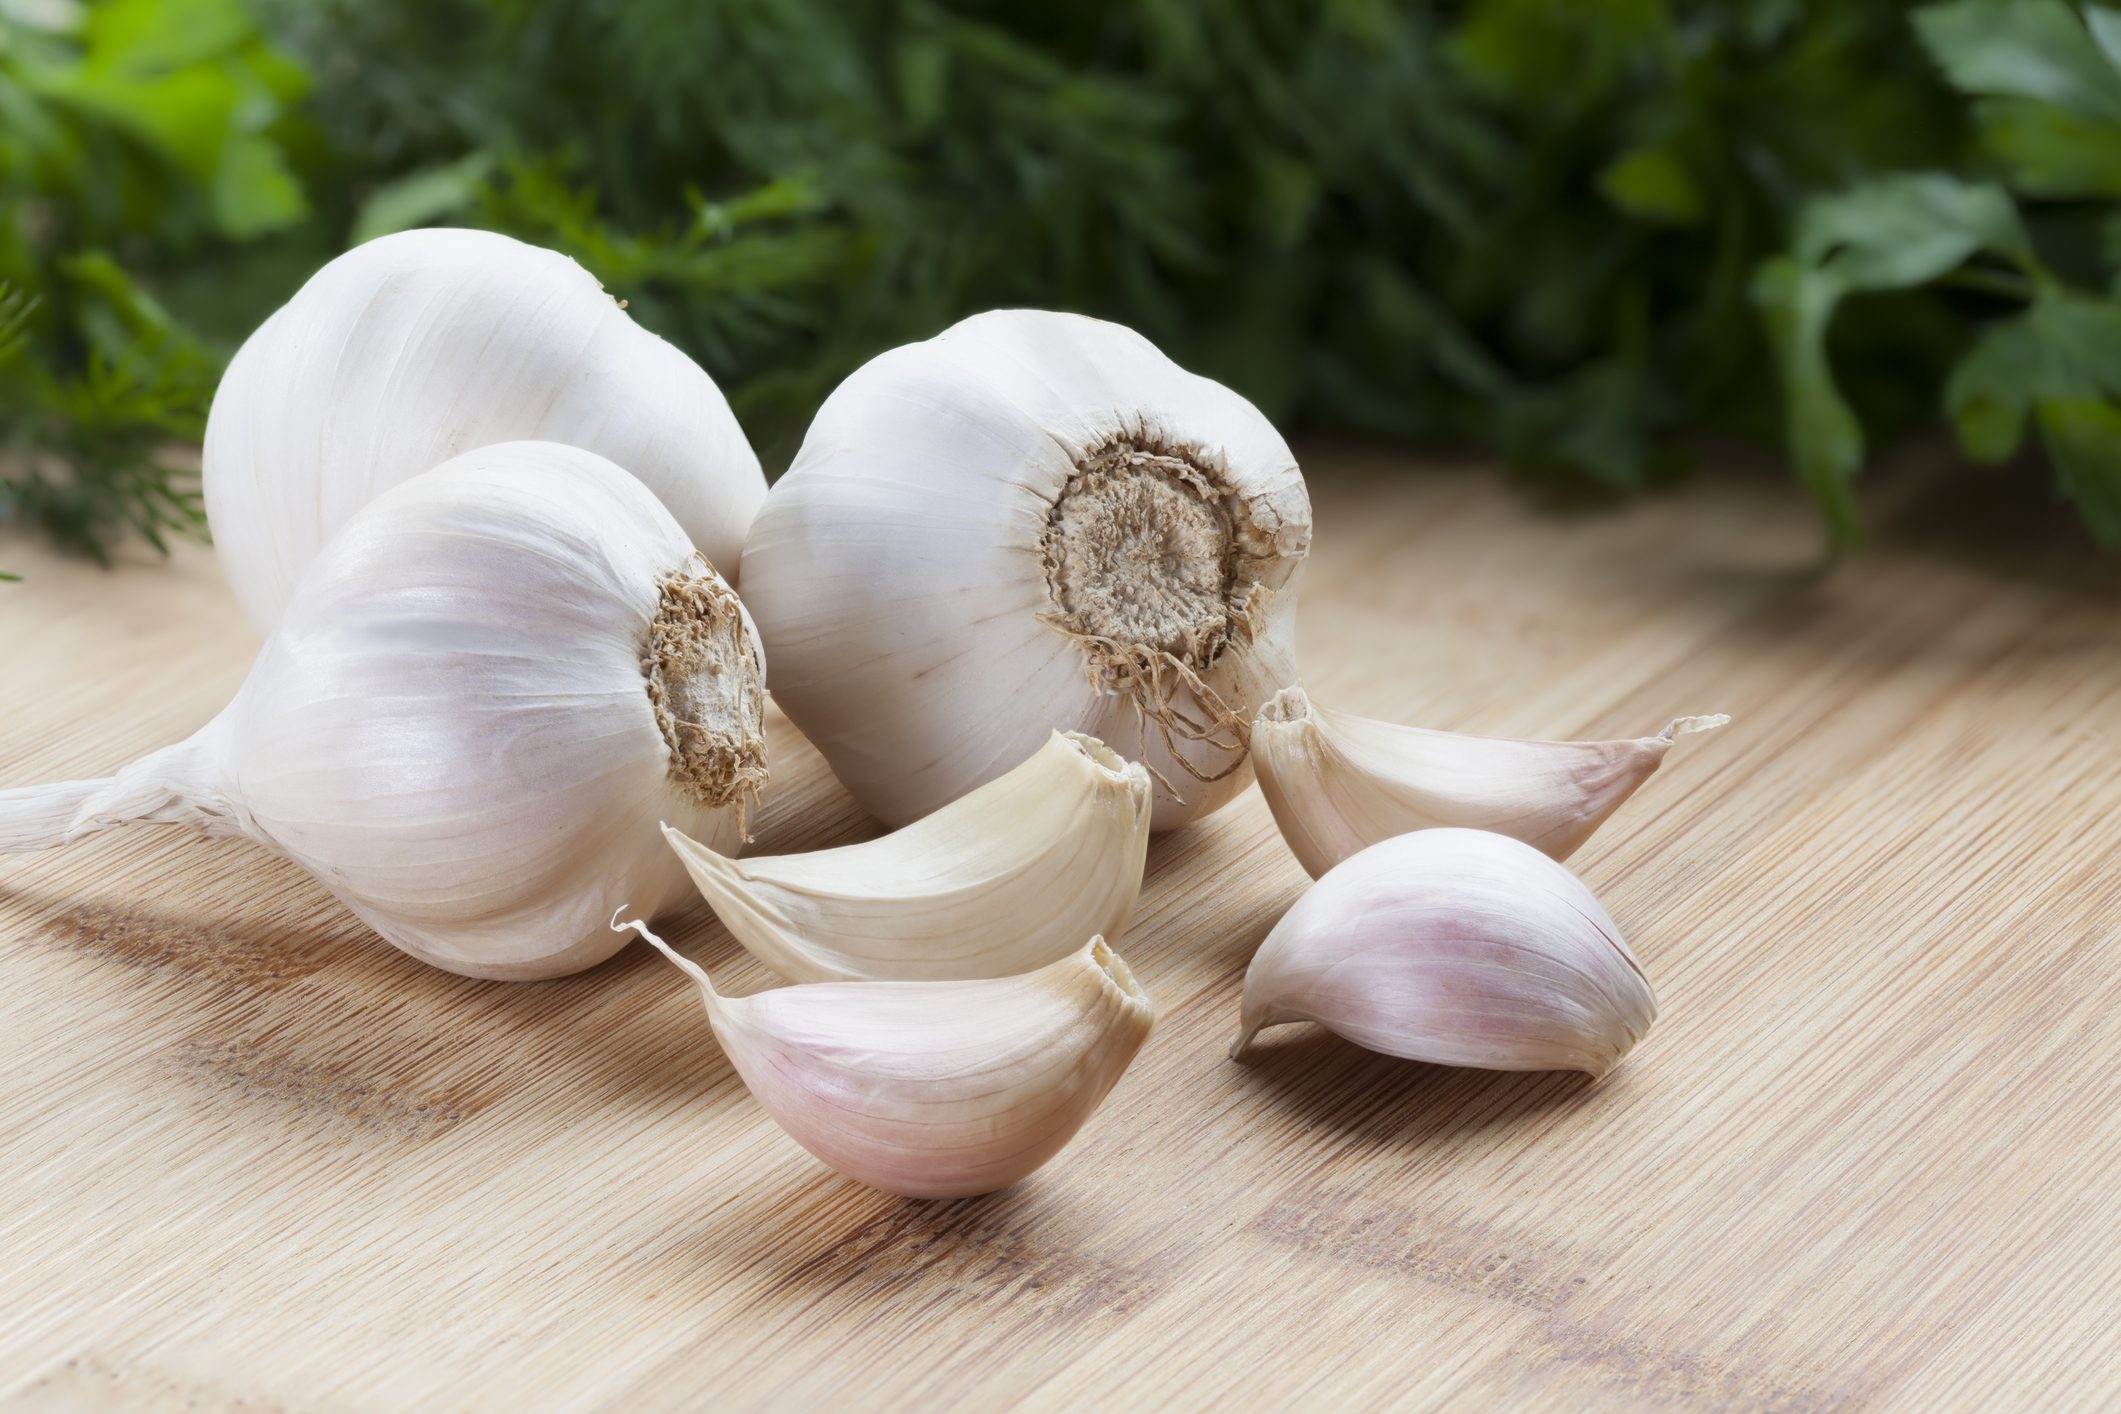 Can Garlic Help Lower Your Cholesterol? What Studies Say